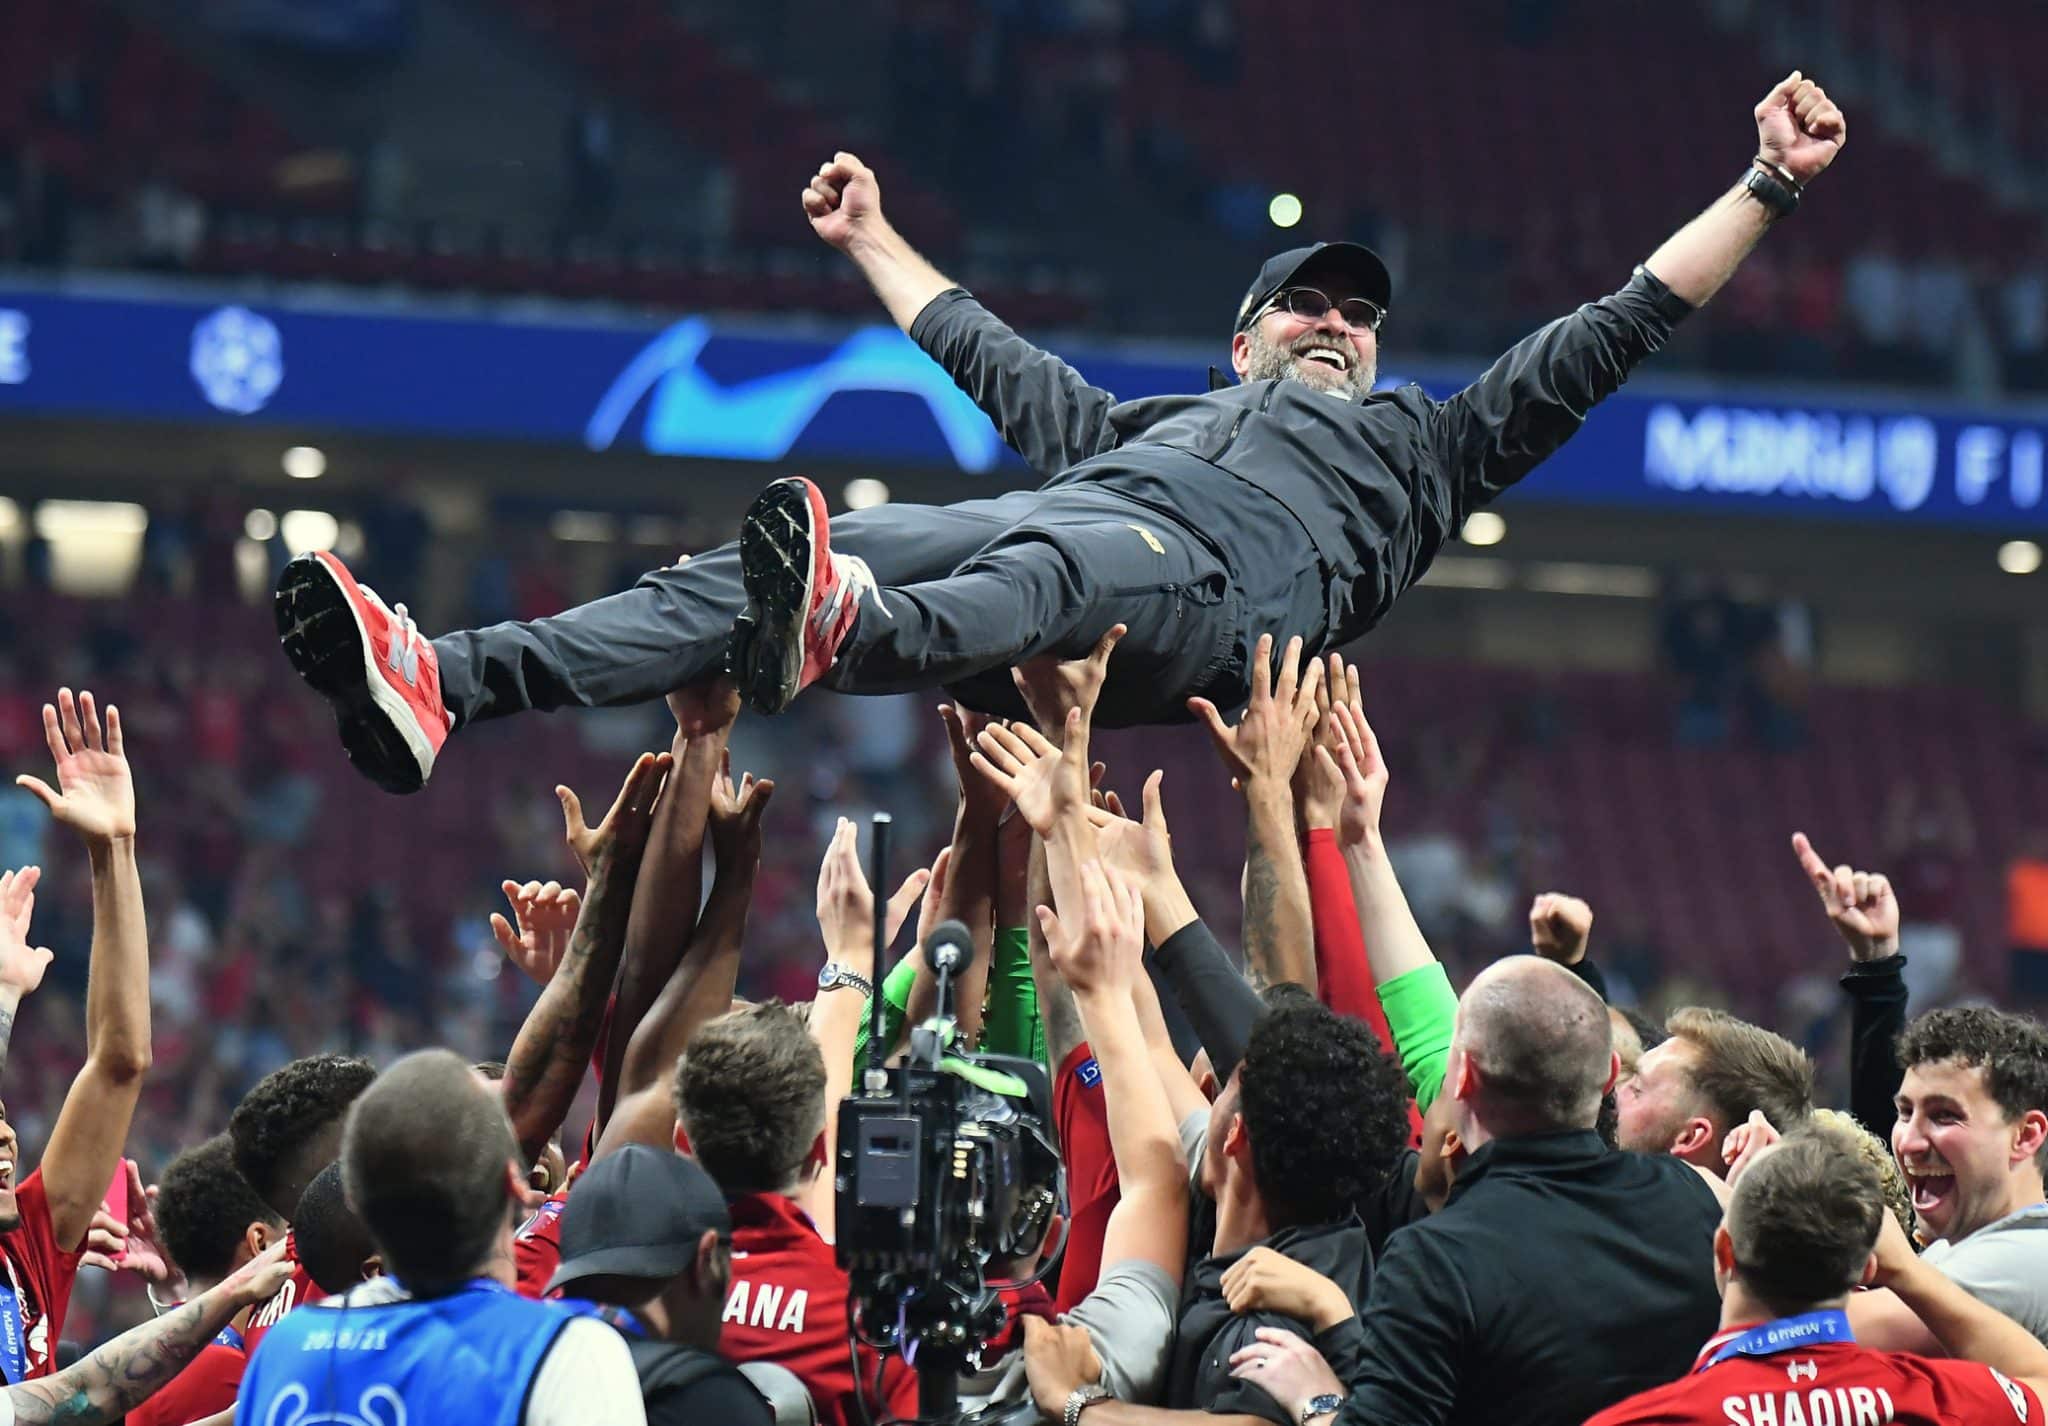 Jürgen Klopp bids emotional farewell to Liverpool: An era ends at Anfield as Arne Slot is set to take over as manager